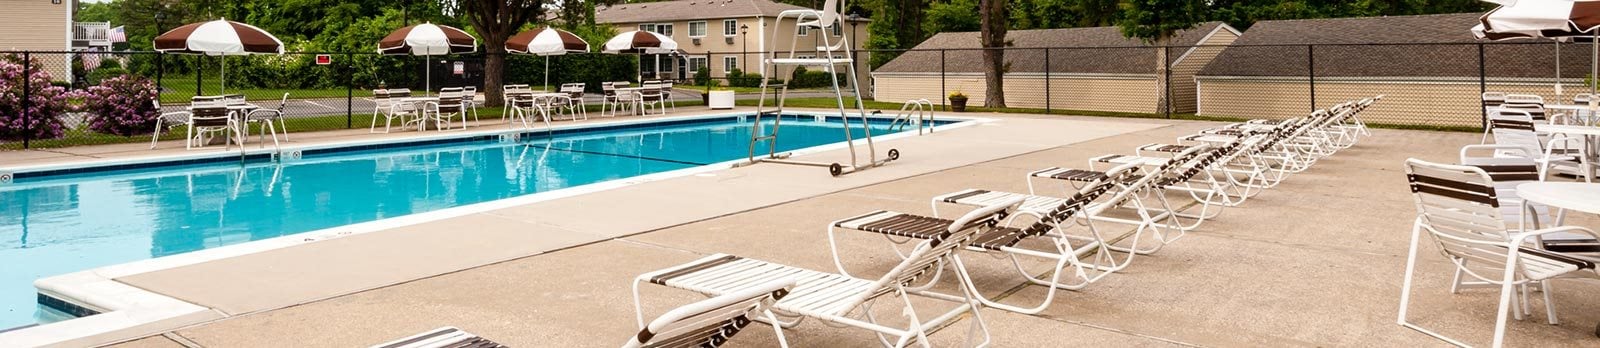 Swimming Pool With Relaxing Sundecks at Lakeside Village, East Patchogue